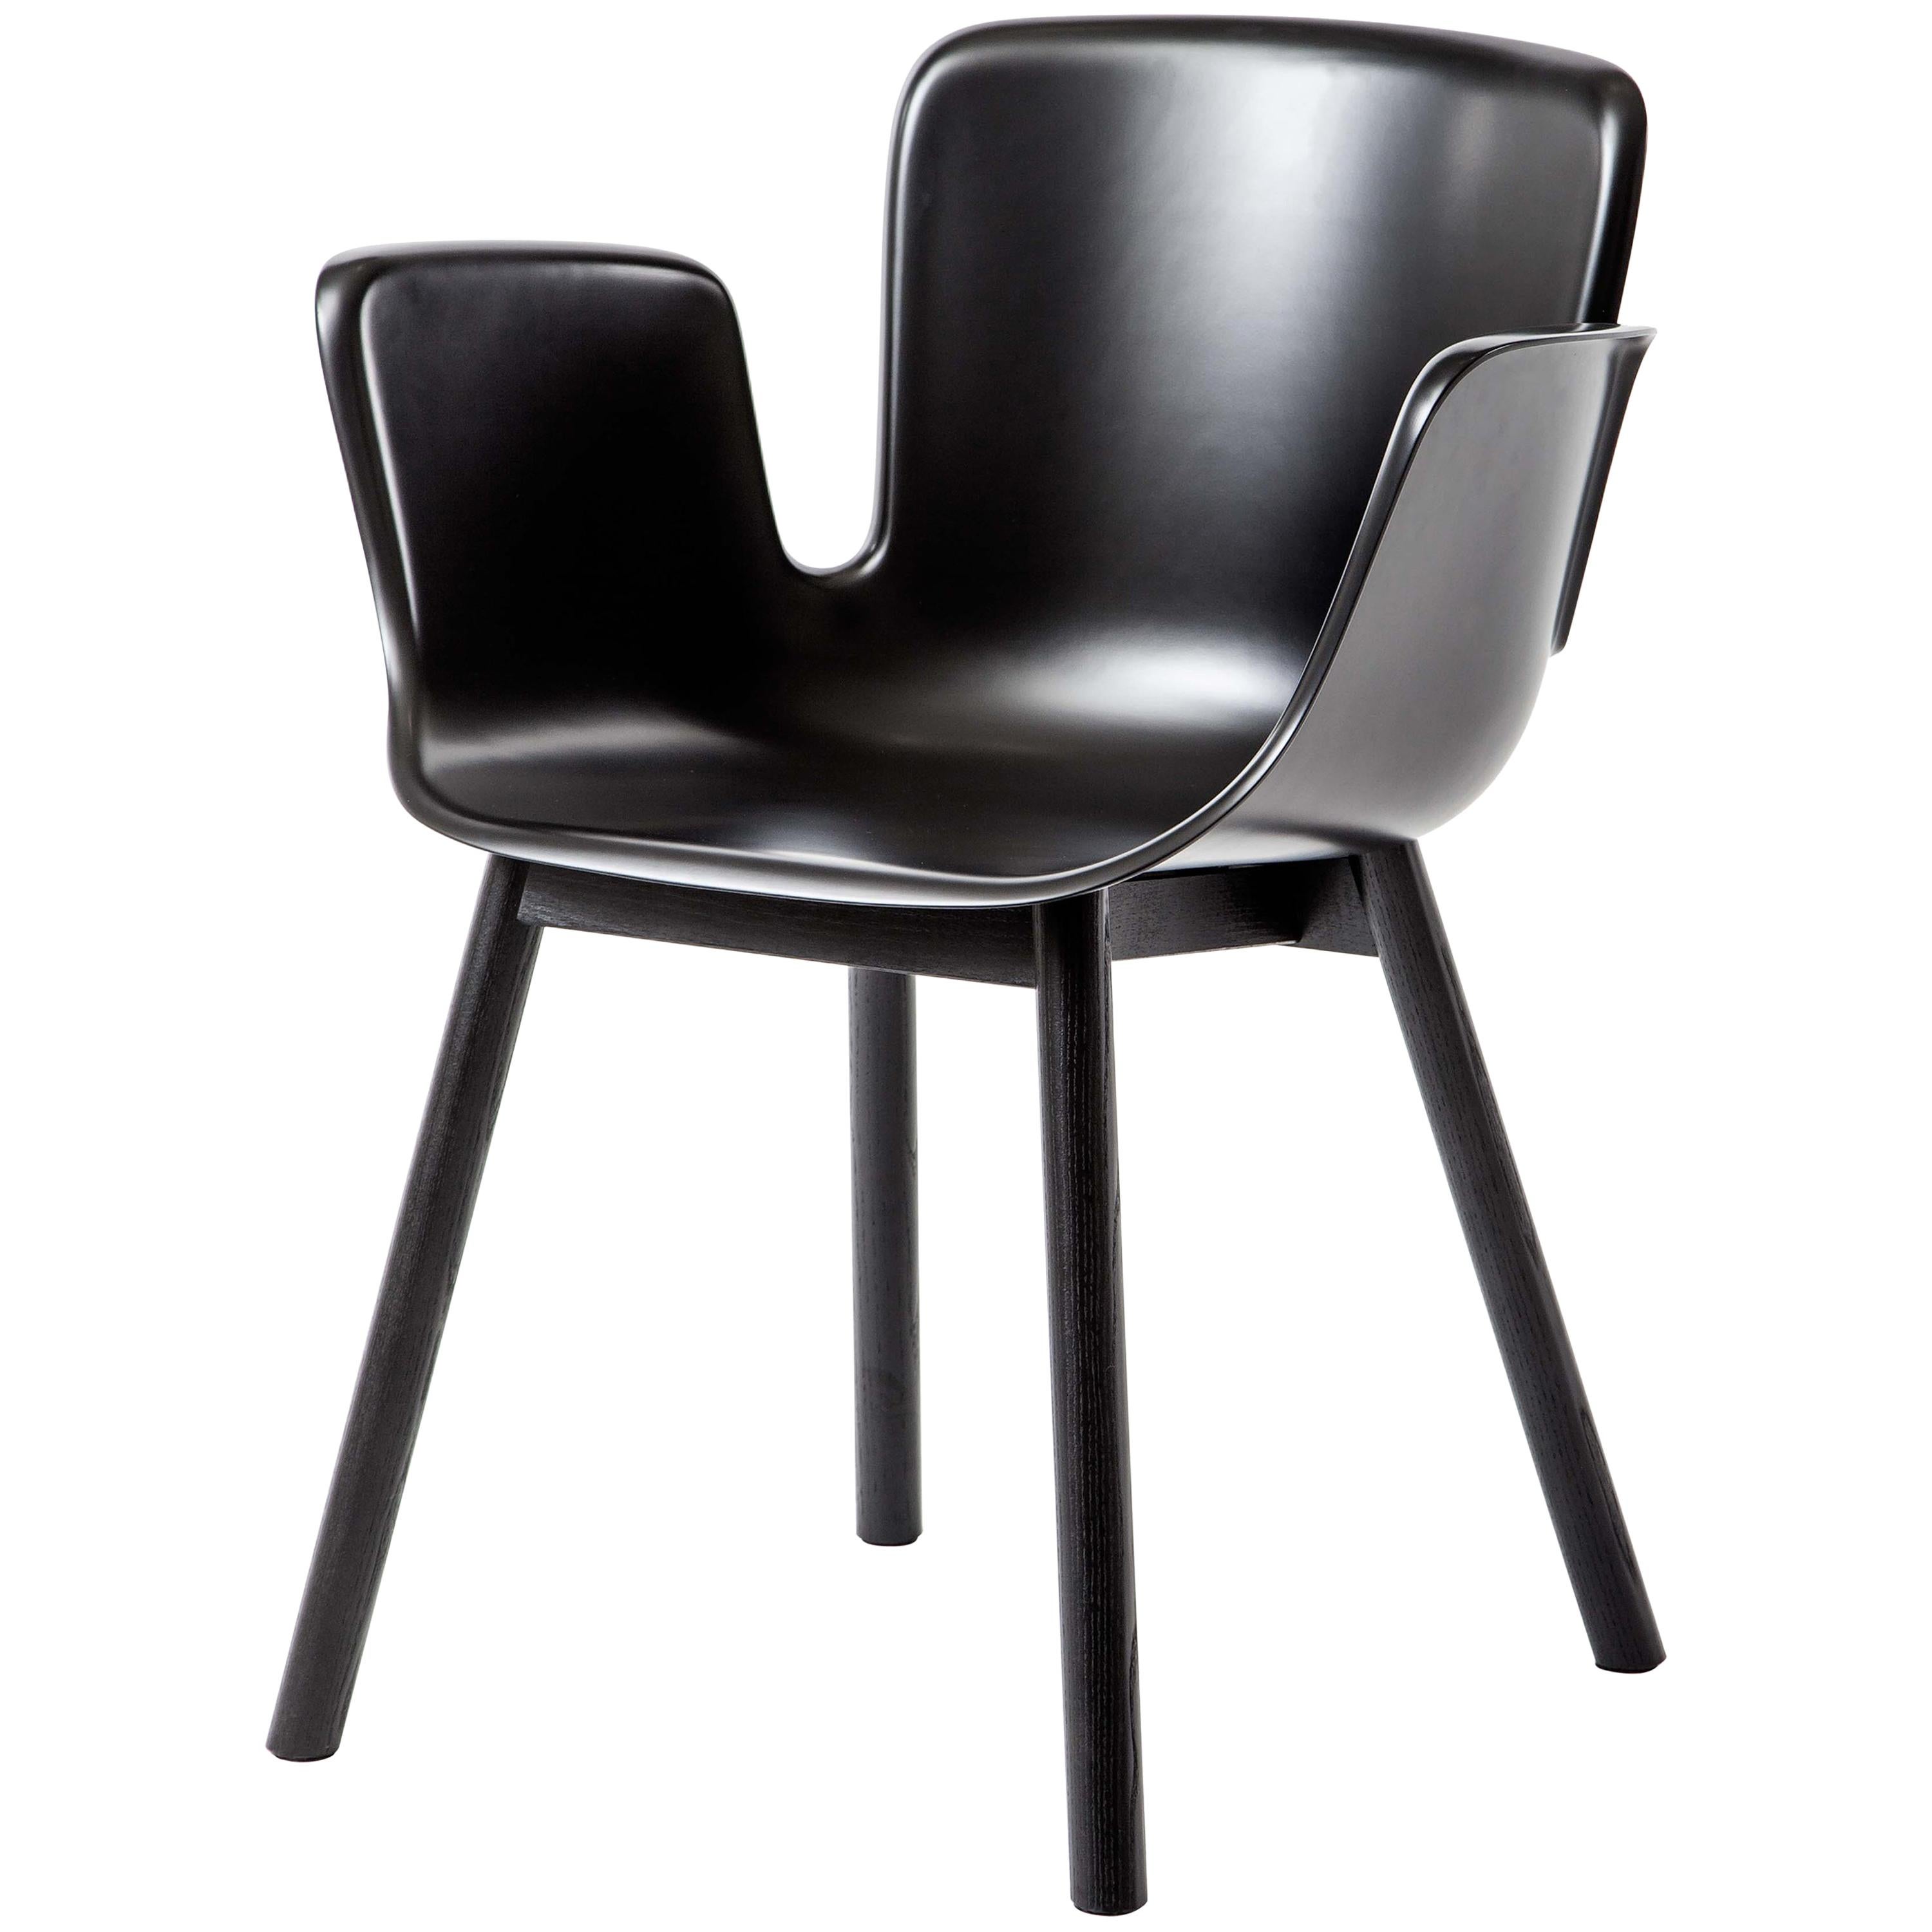 Werner Aisslinger Juli Plastic Chair with Graphite Black Seat by Cappellini For Sale